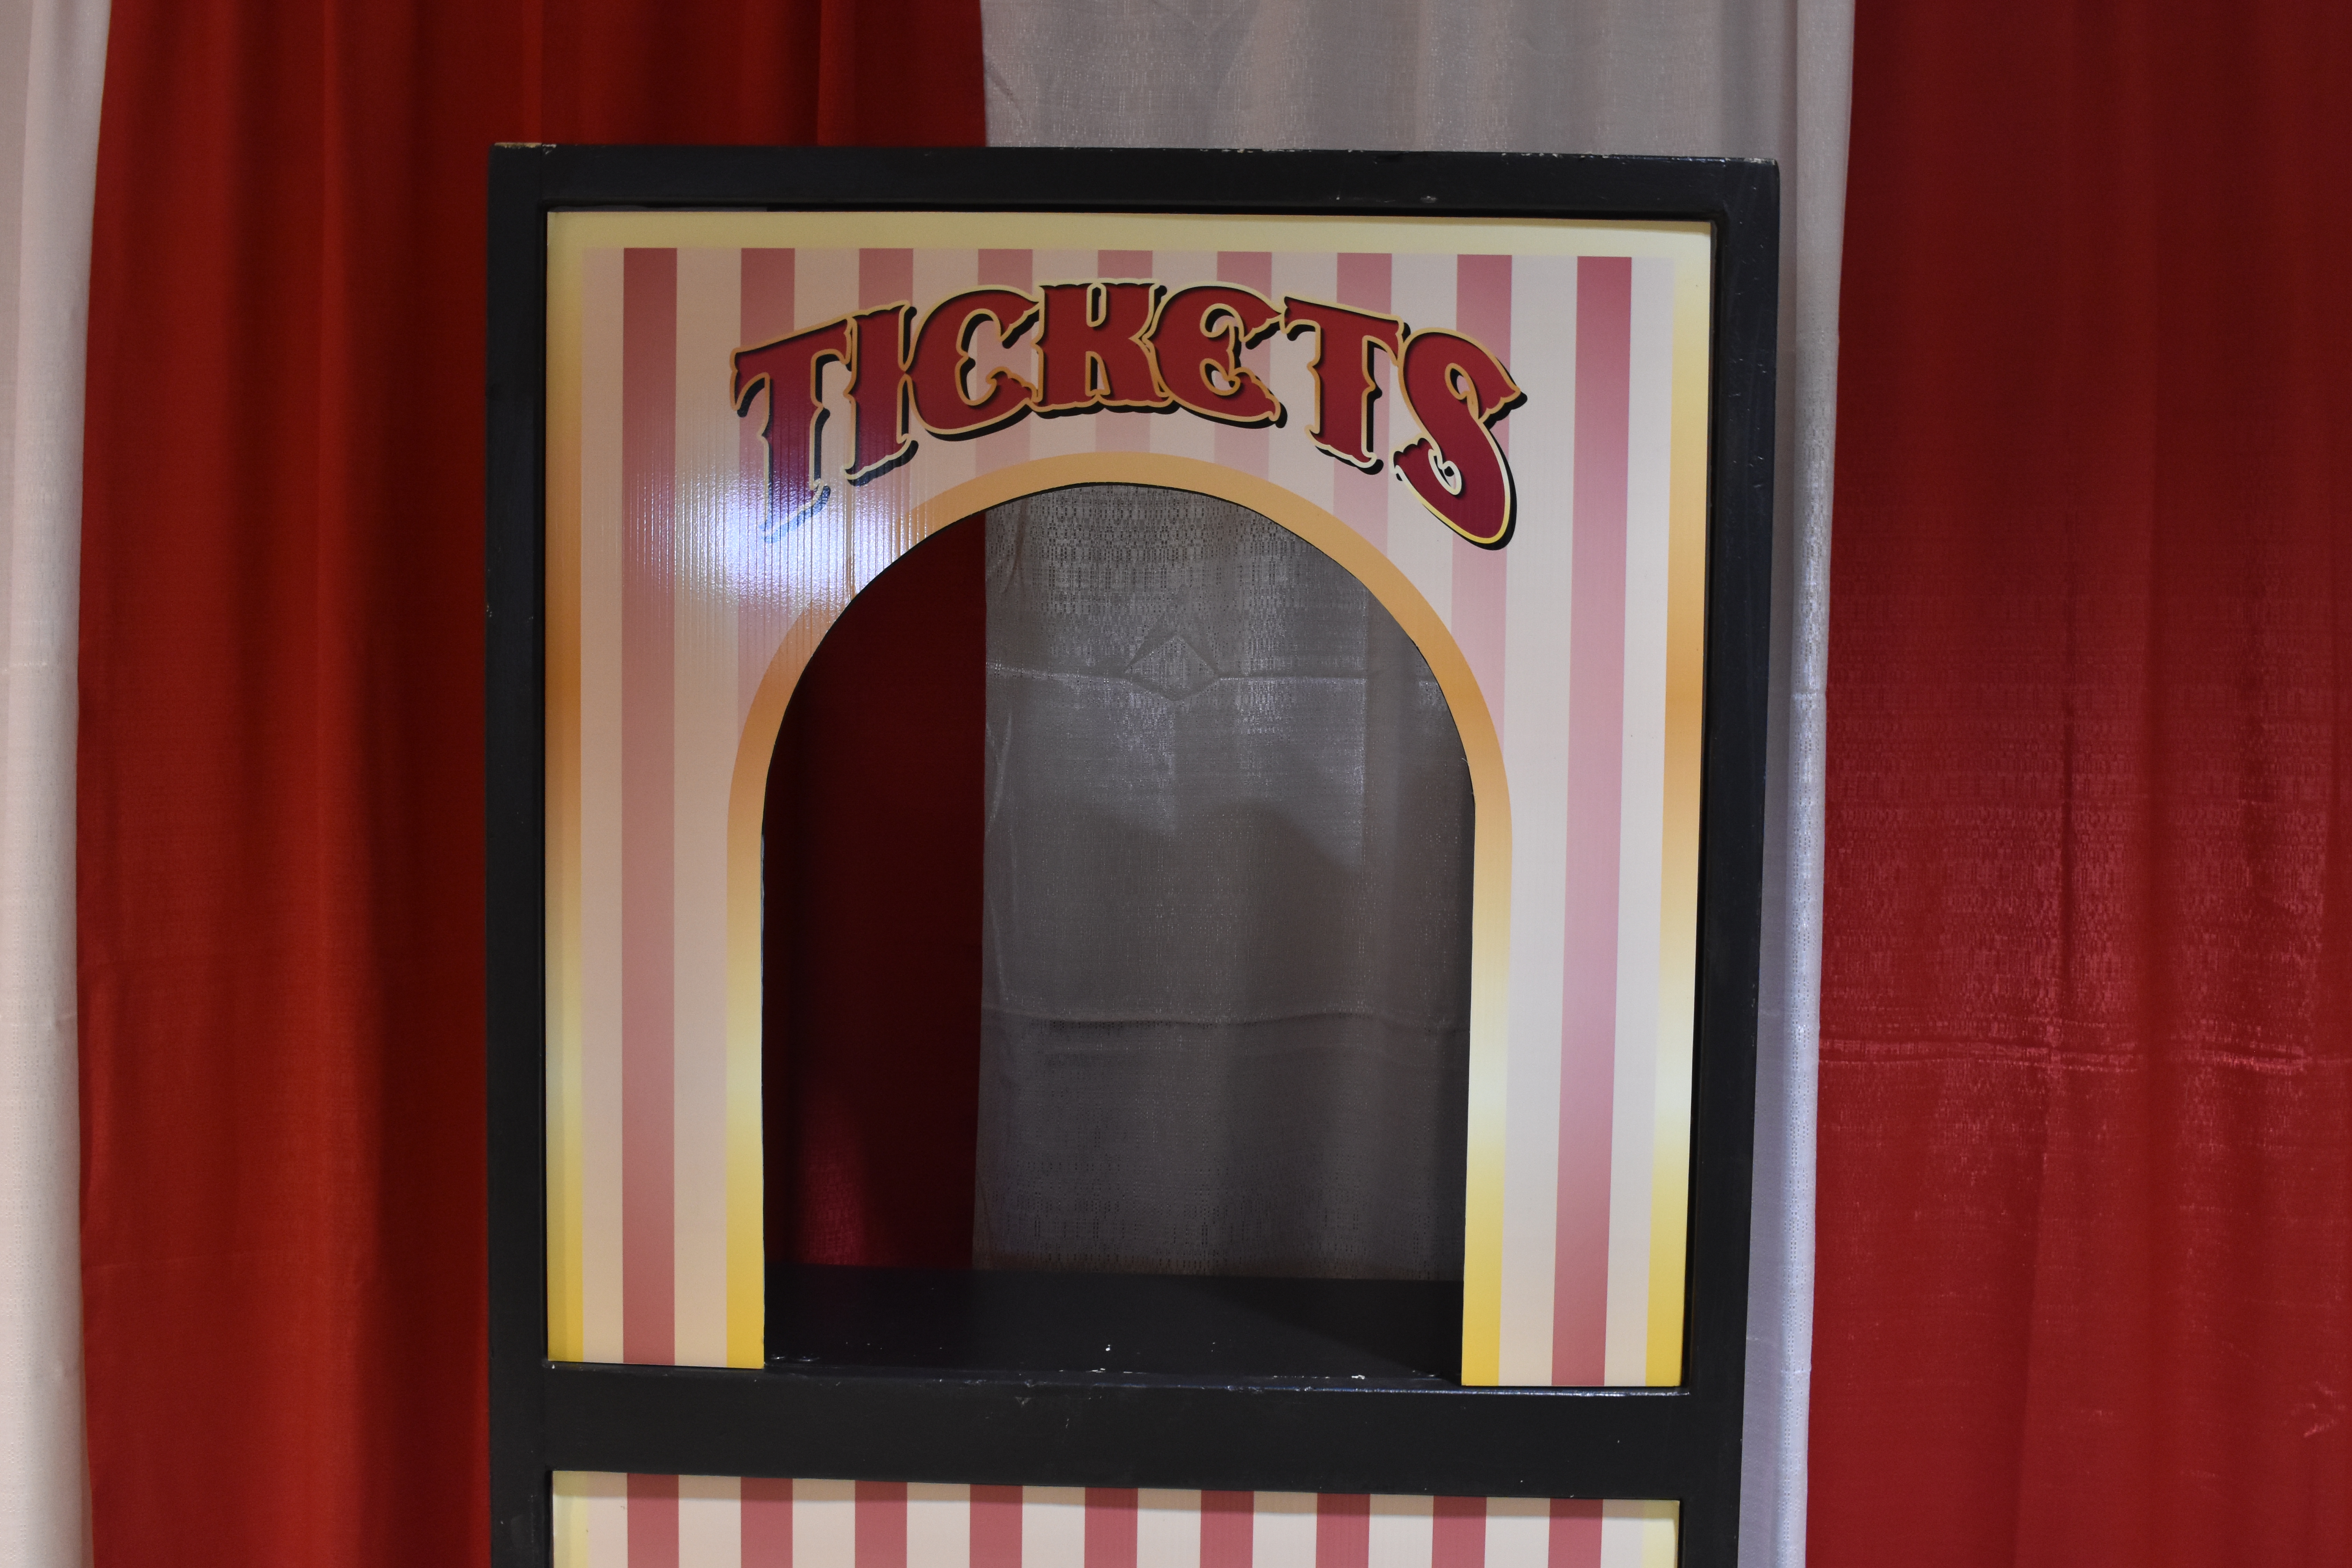 carnival ticket booth